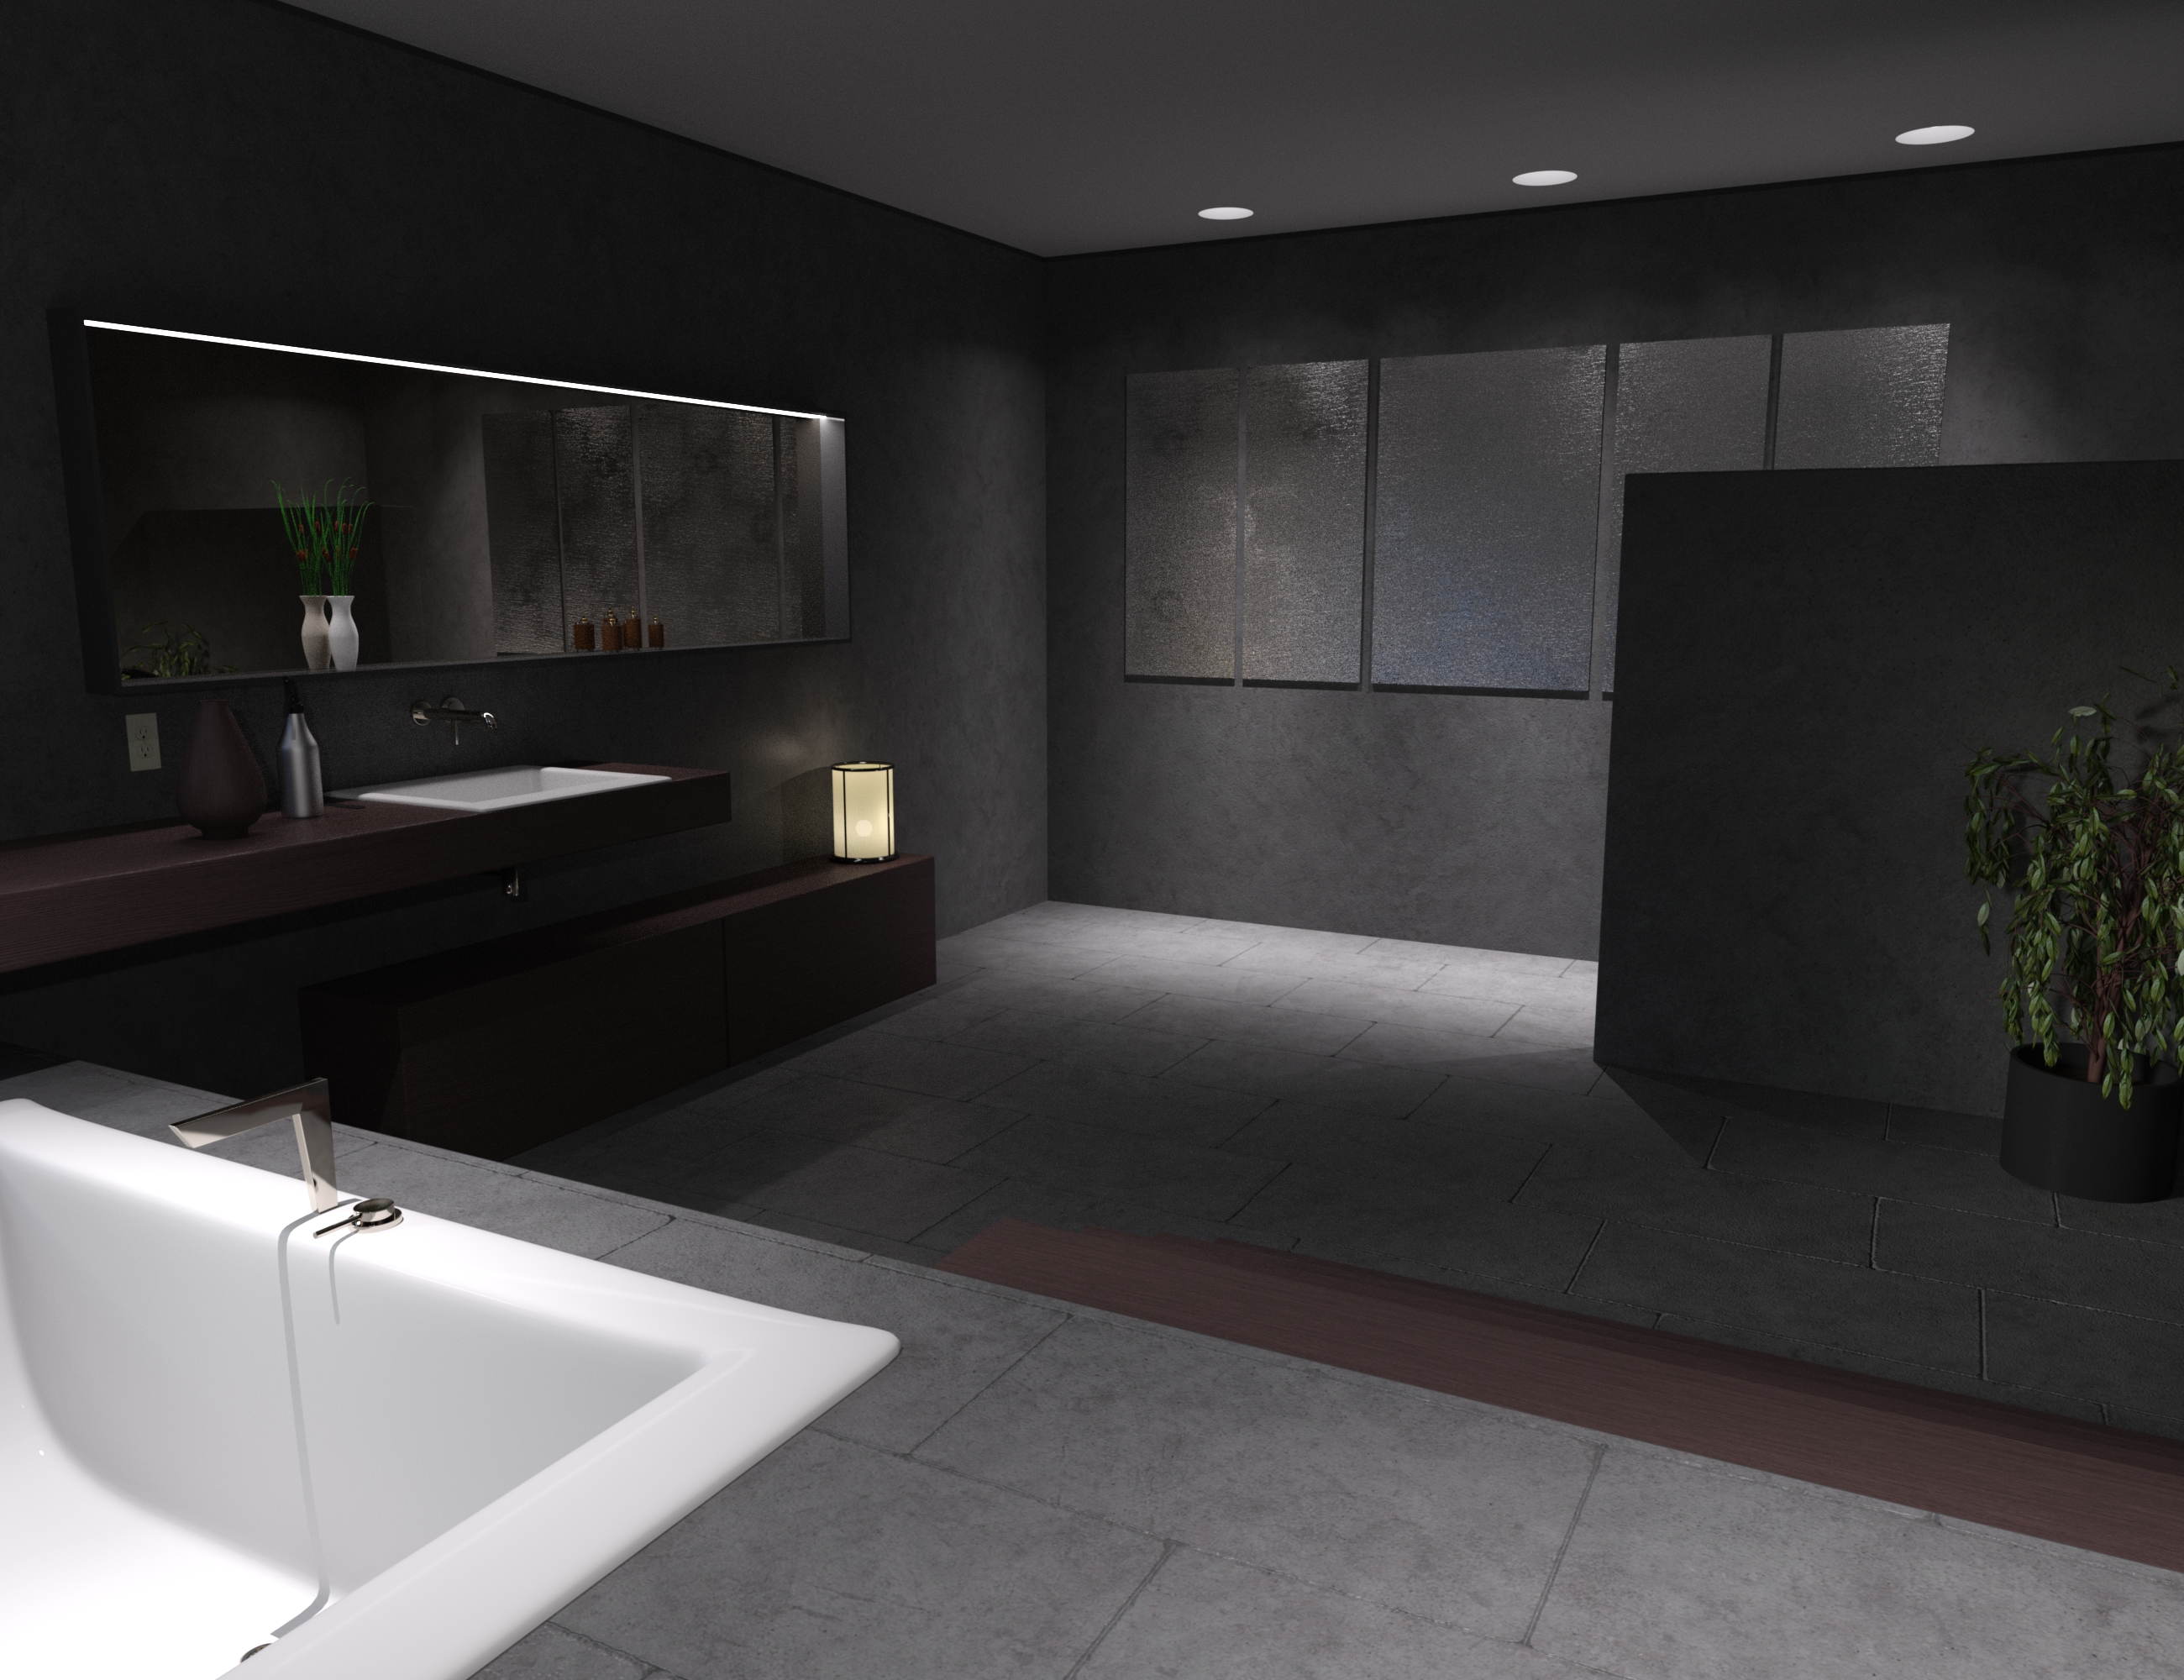 Ultimate Patio Home - Bathroom by: ImagineX, 3D Models by Daz 3D